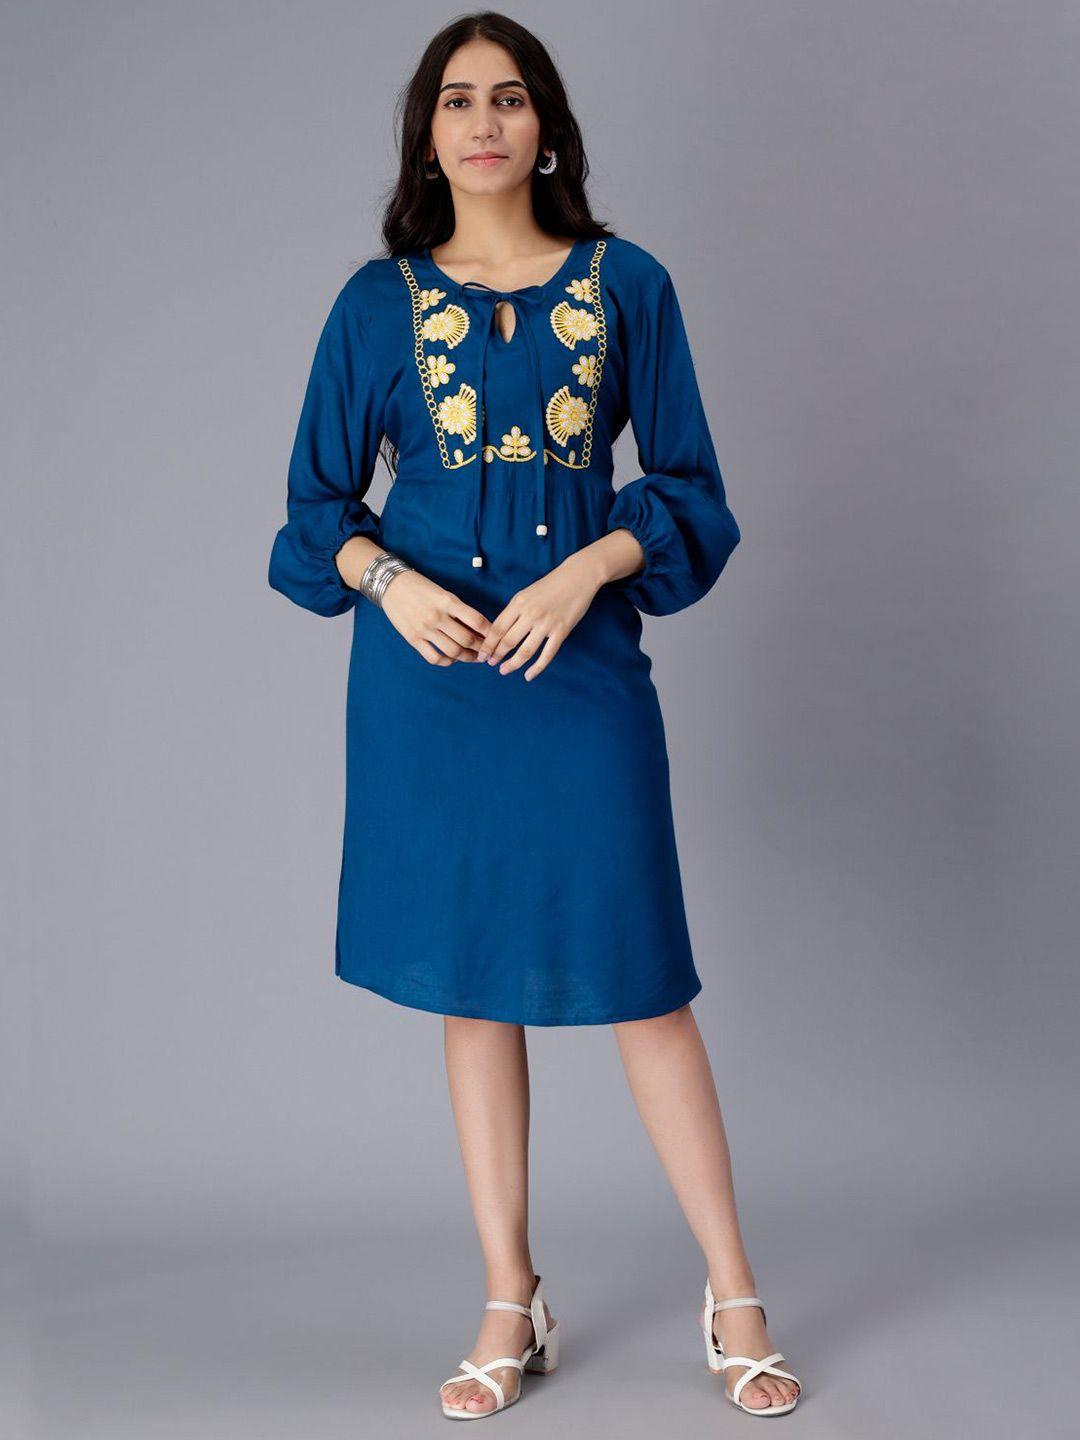 saakaa floral embroidered keyhole neck a-line dress